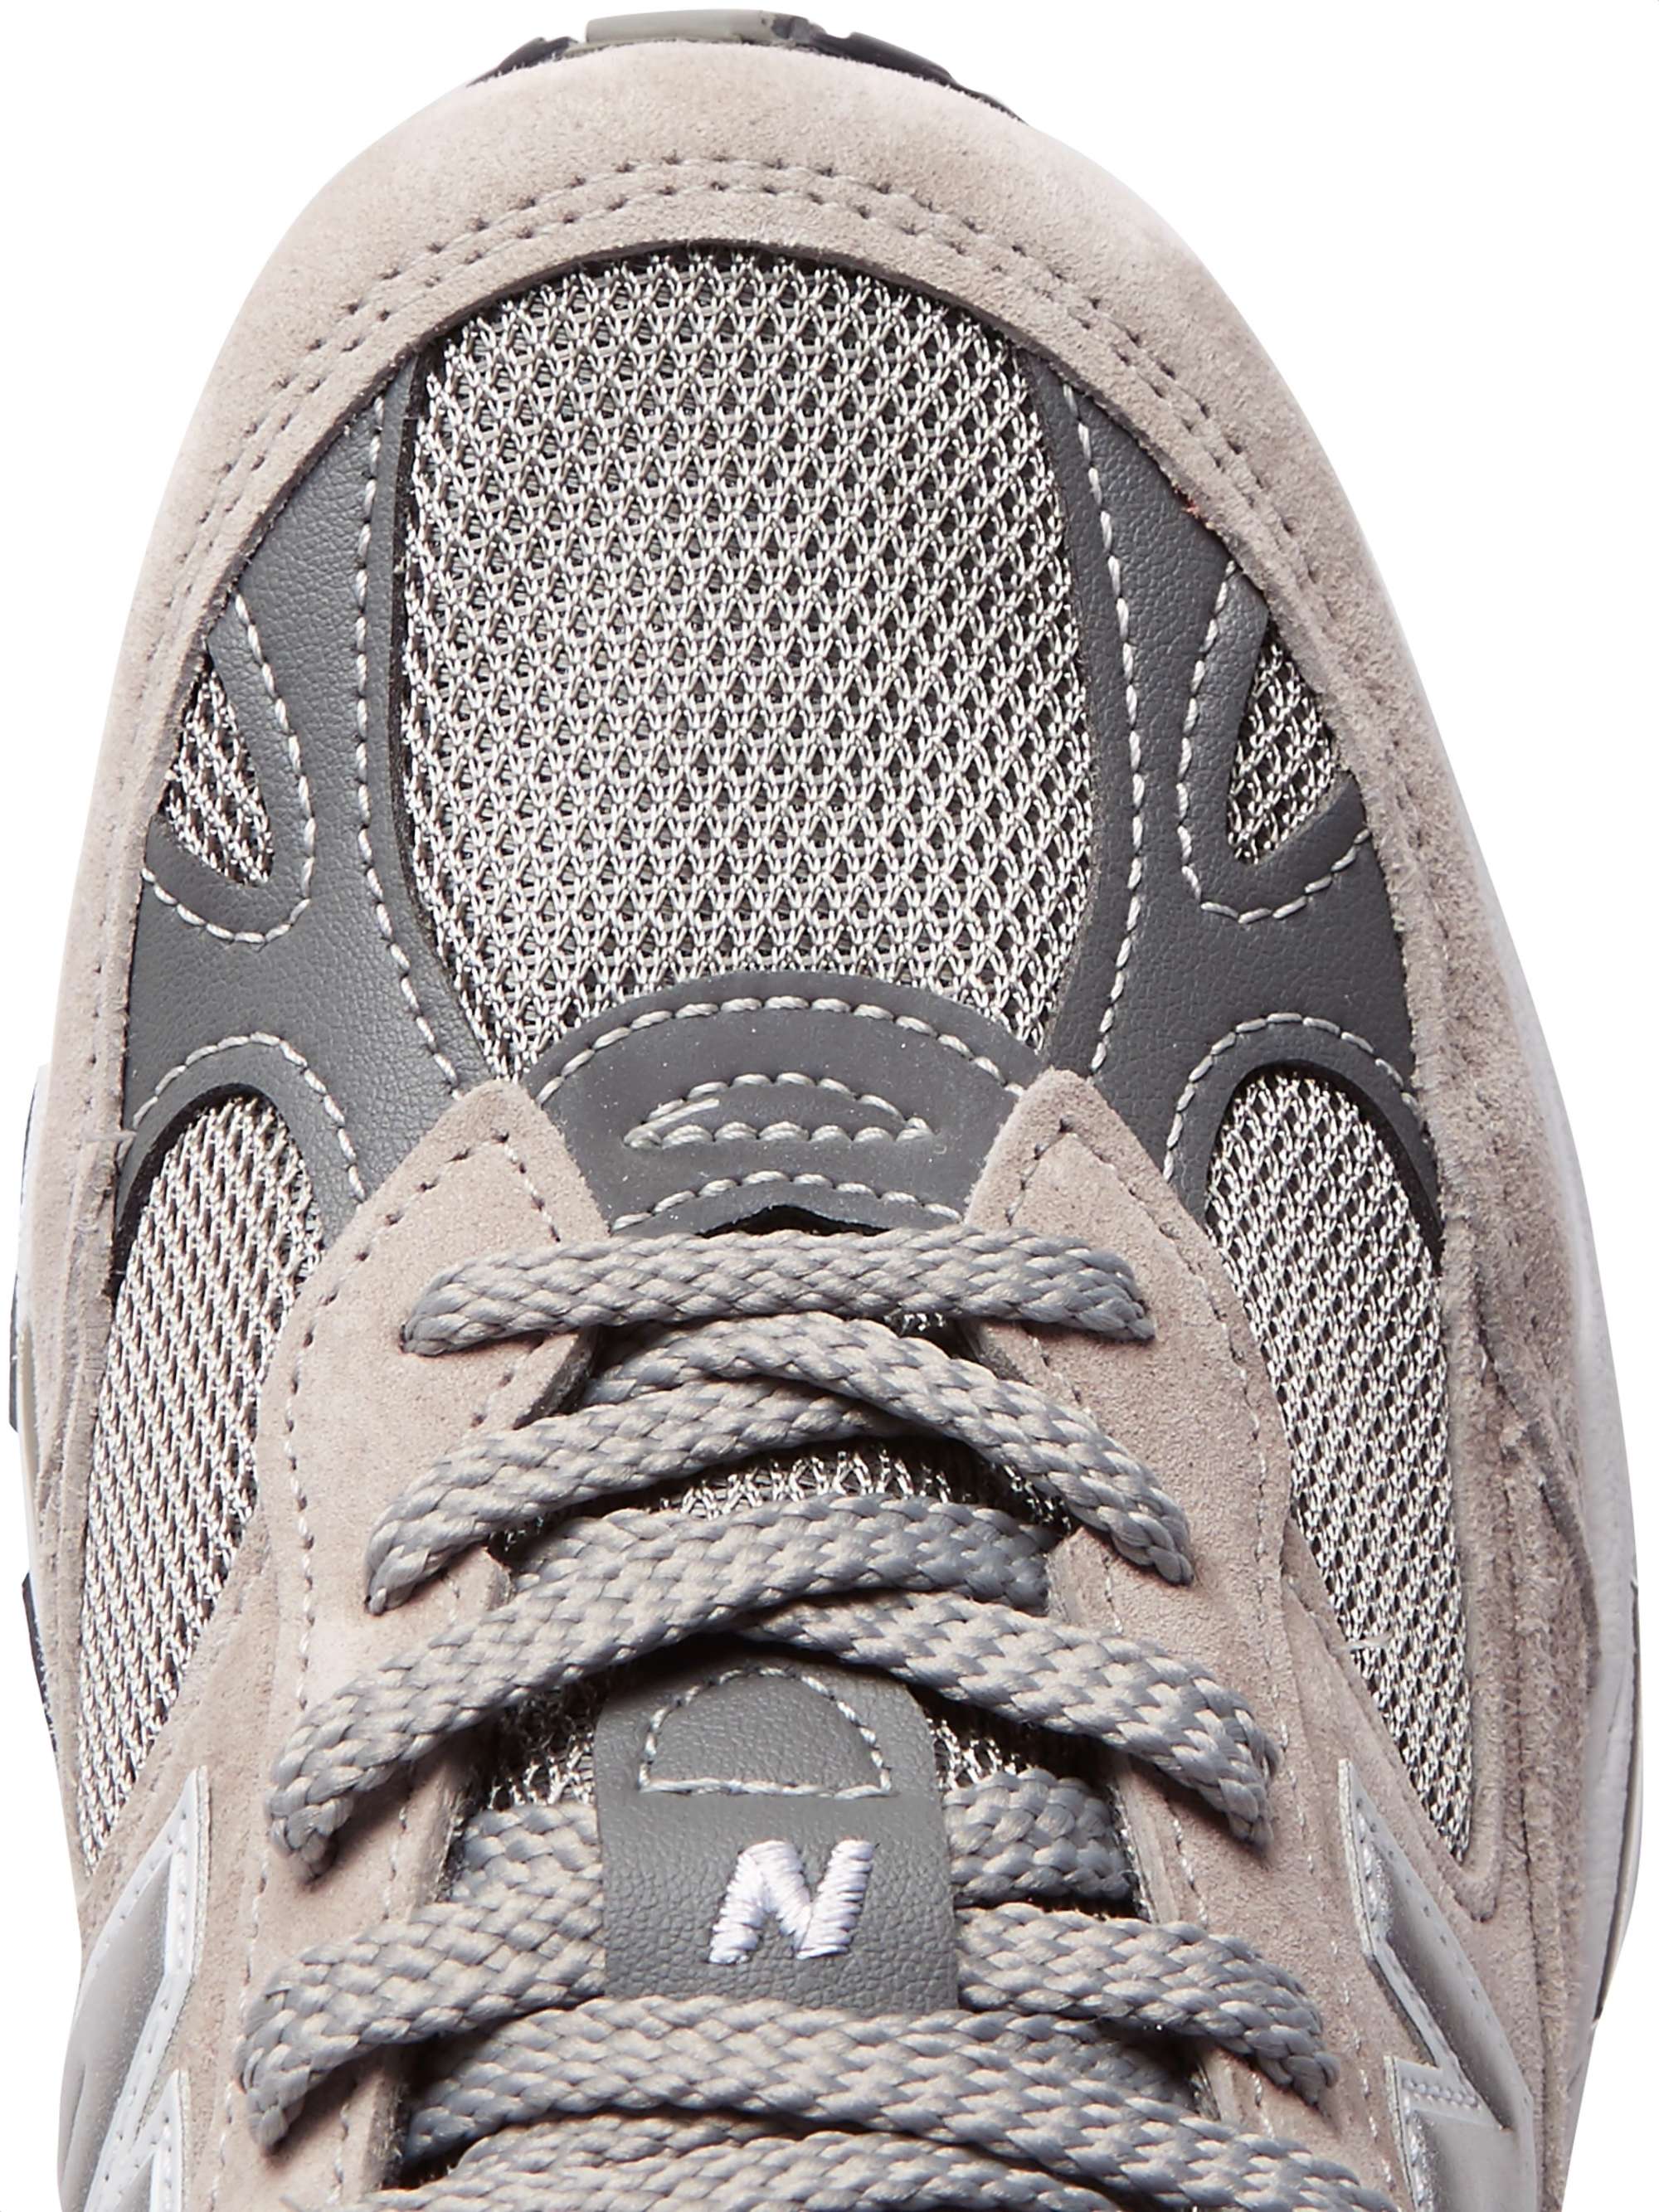 NEW BALANCE 991 Suede, Mesh and Leather Sneakers